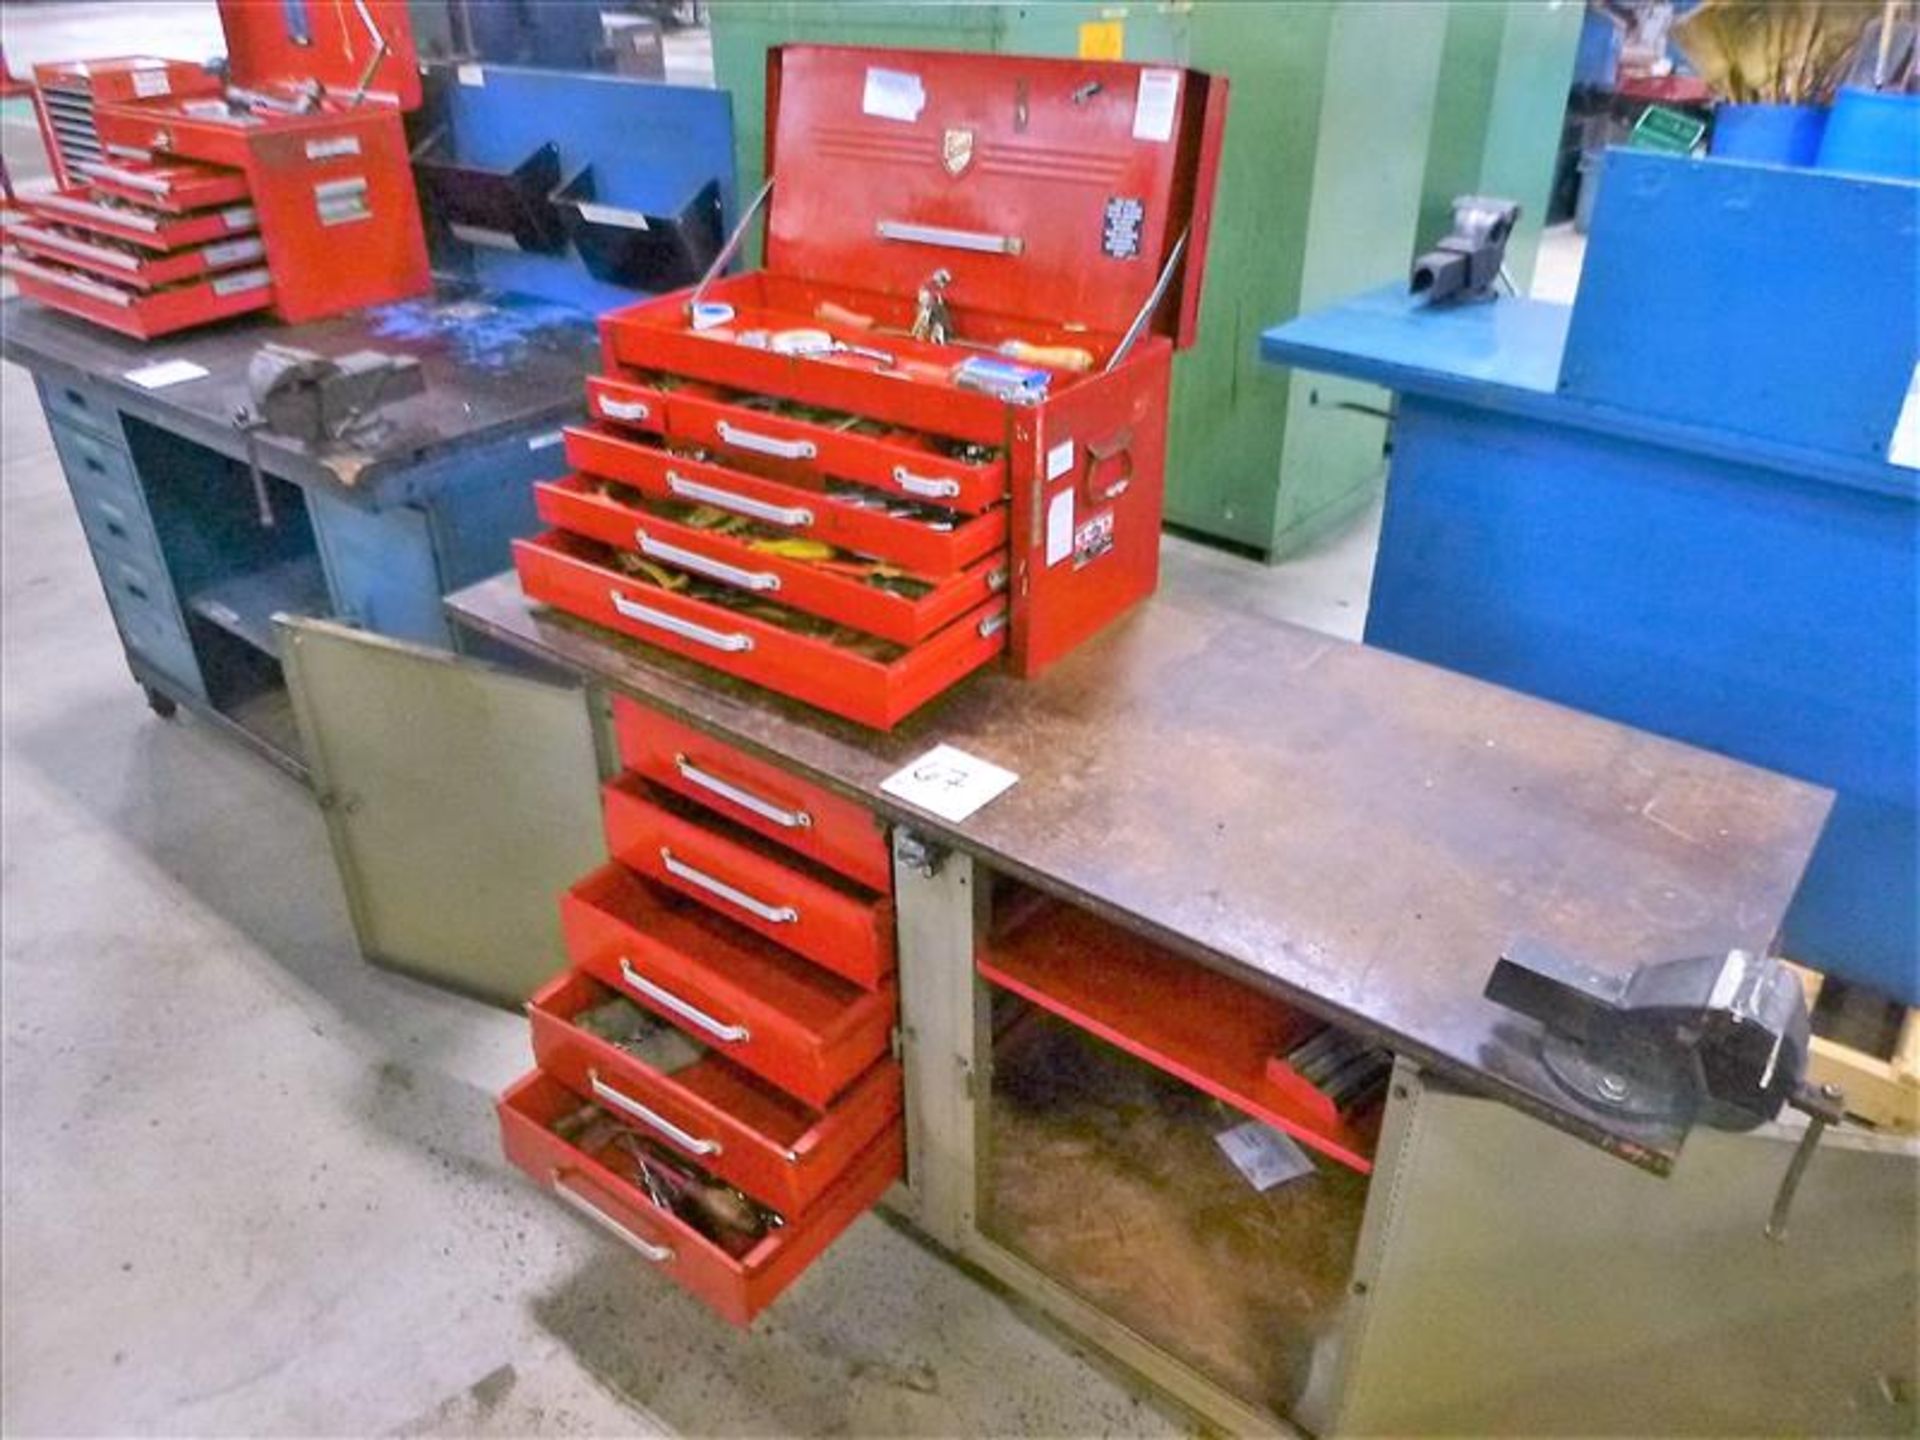 Rolling Work Bench, approx. 24" x 60" c/w 6" Bench Vice & Contents - Image 2 of 2